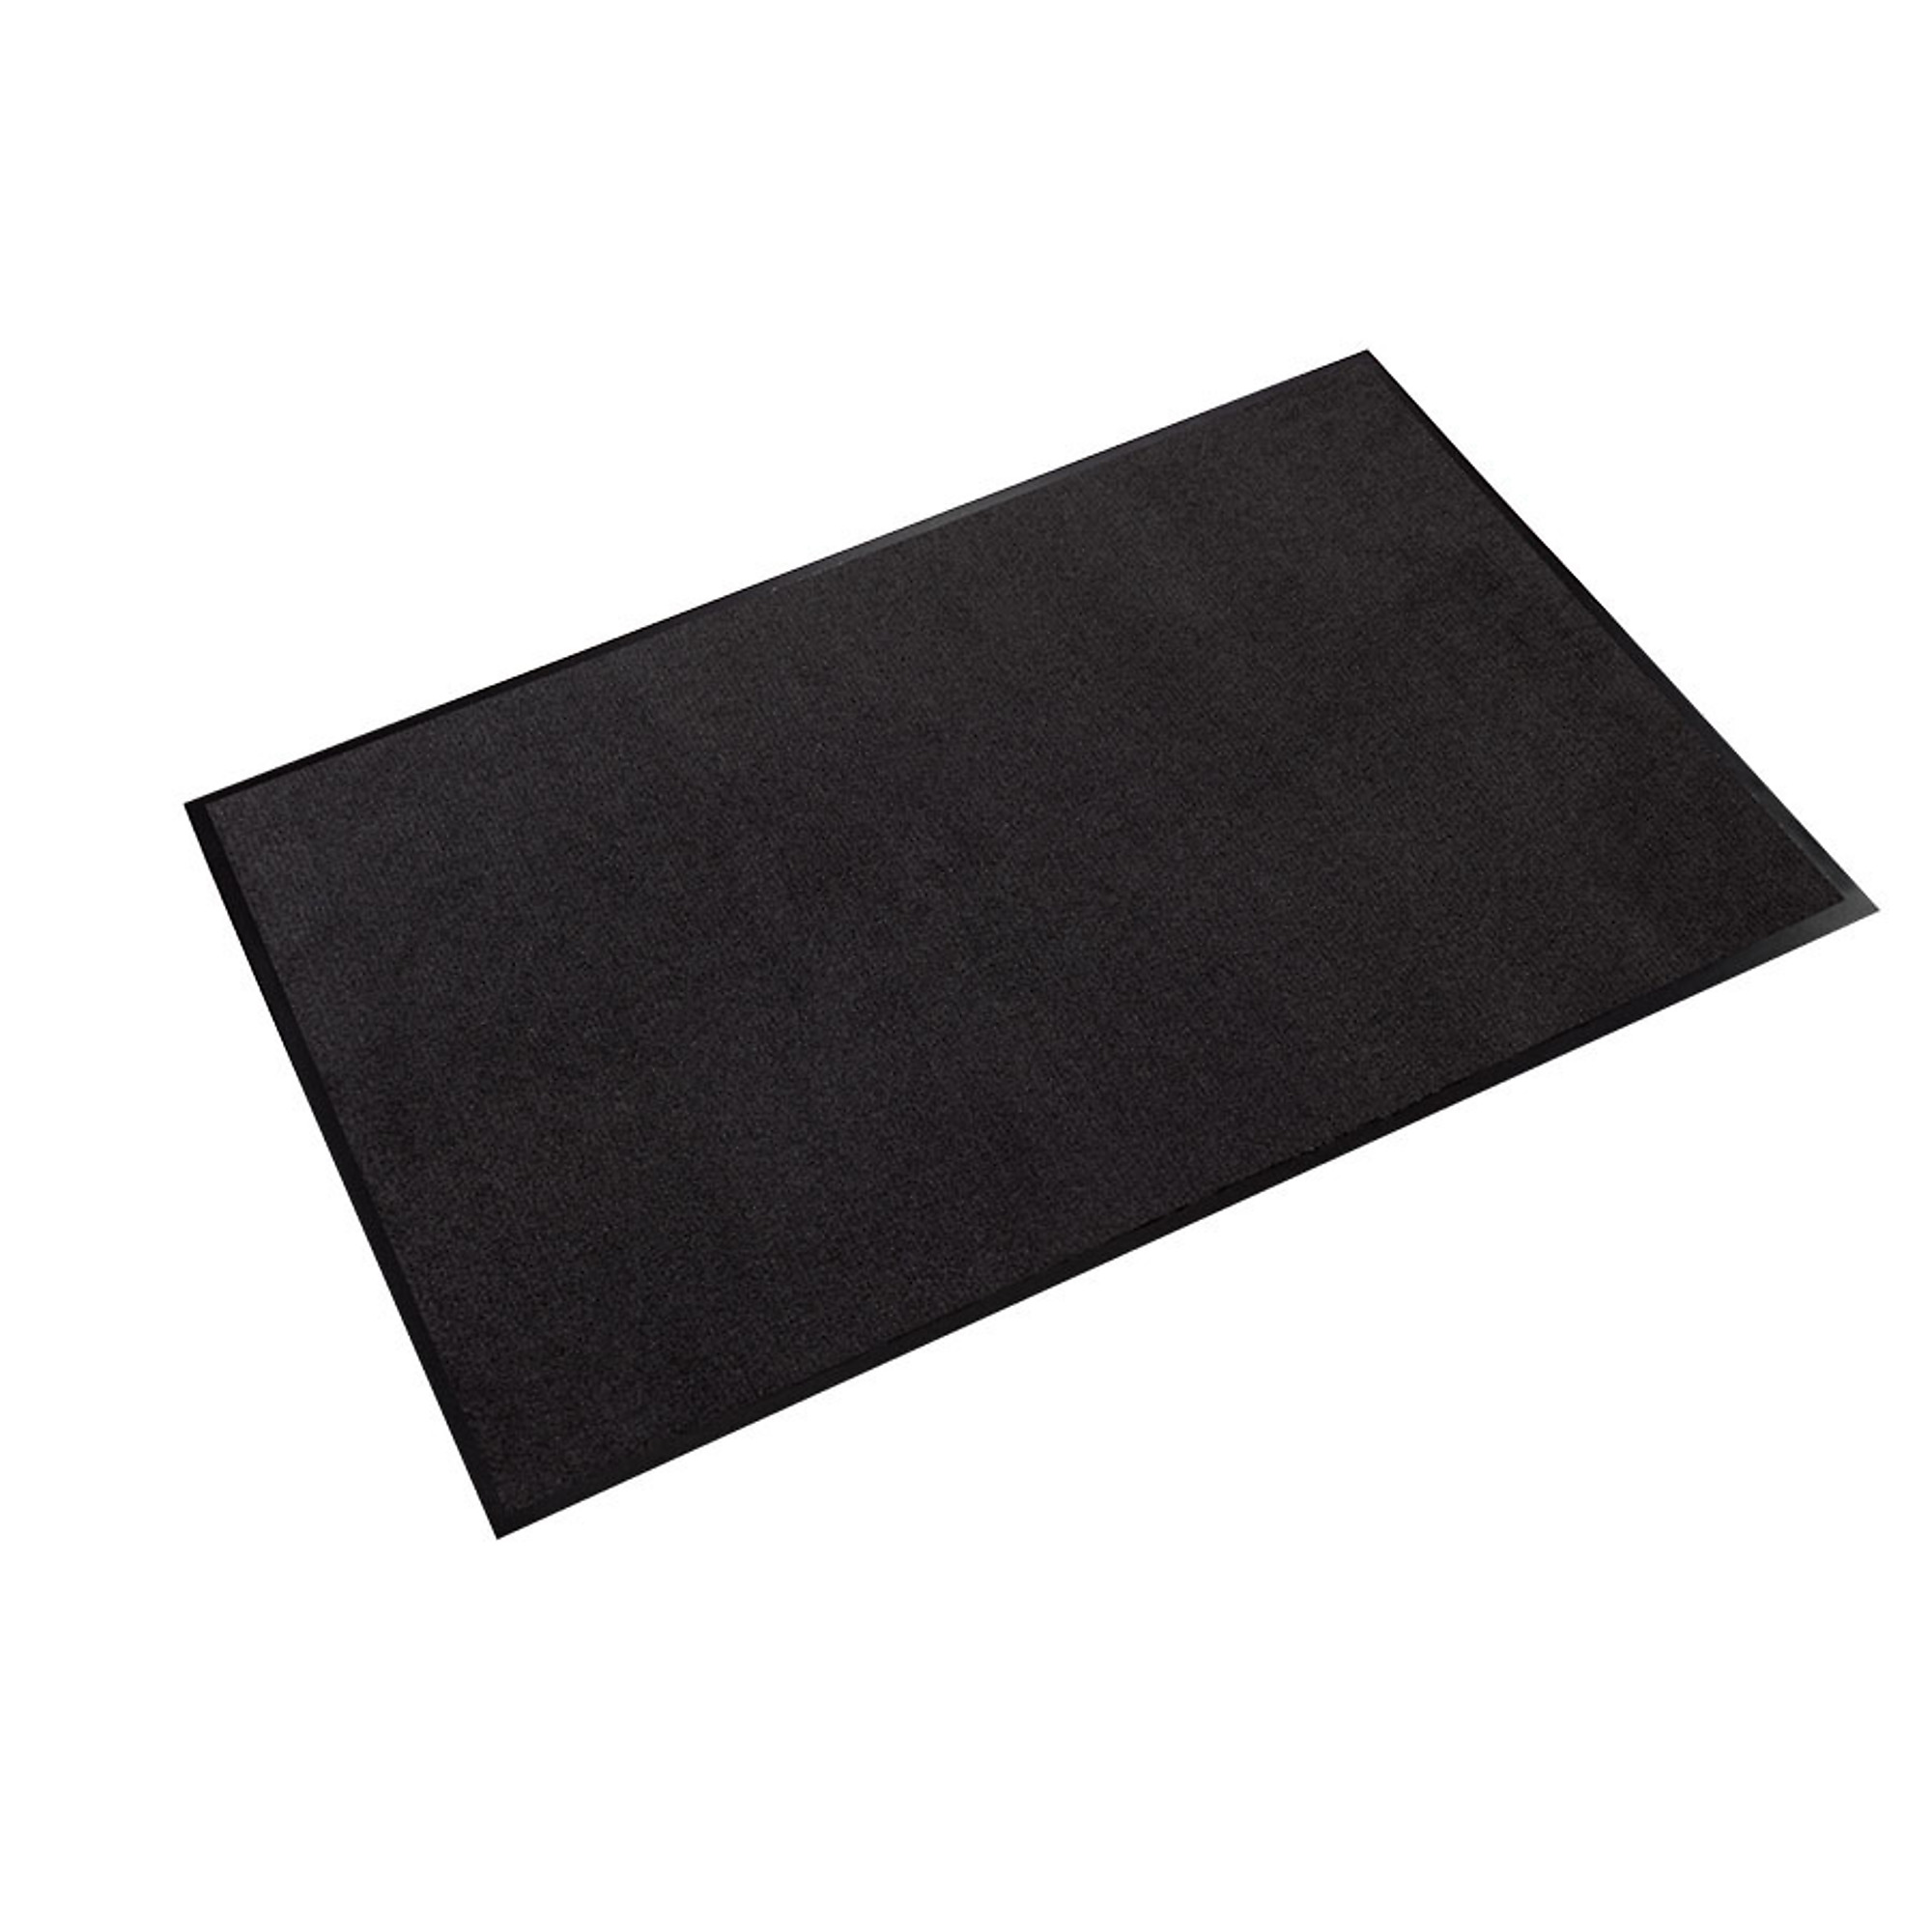 Crown Matting Technologies, Rely-On Olefin 2ft.x3ft. Black, Width 24 in, Length 36 in, Thickness 3/8 in, Model GS 0023BK